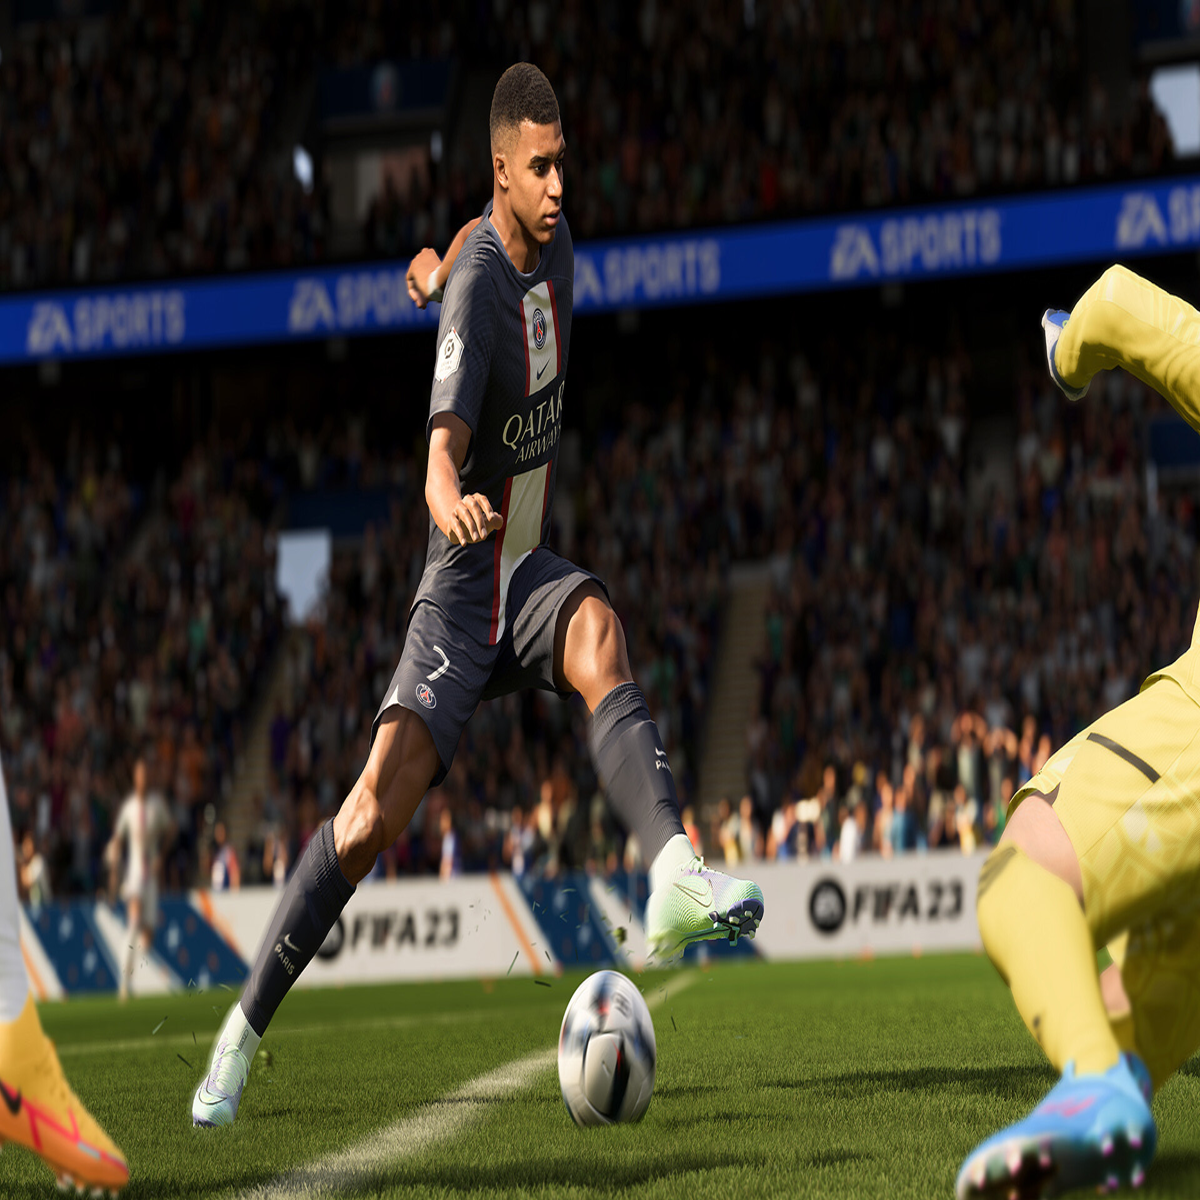 FIFA 23 hits EA Play, Xbox Game Pass Ultimate, and PC Game Pass